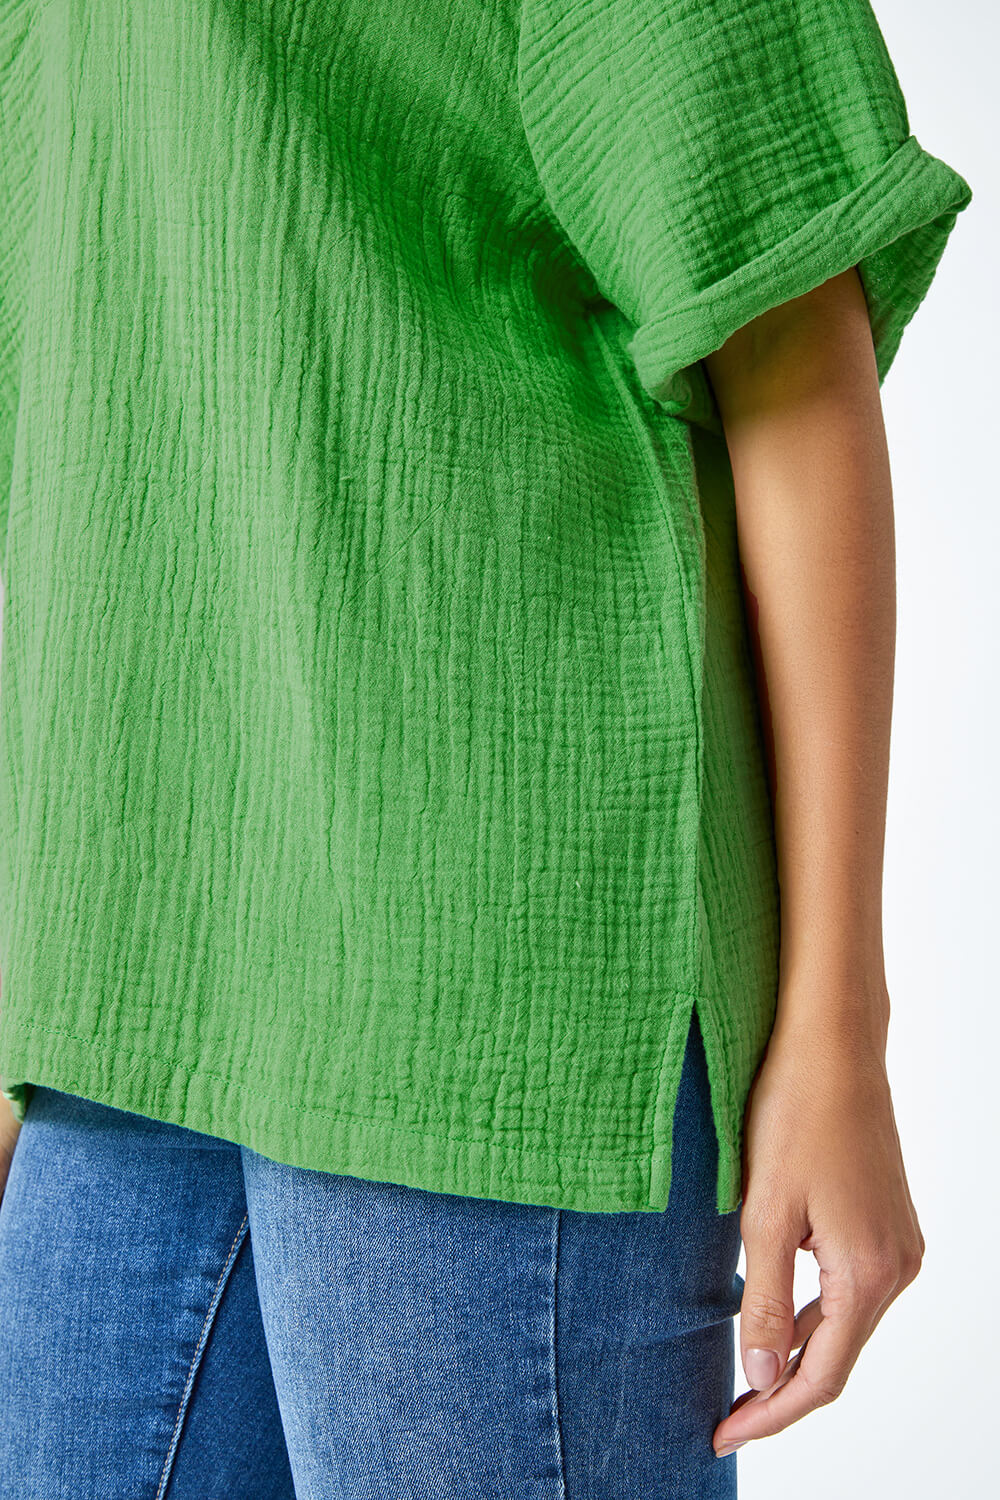 Green Textured Cotton Relaxed T-Shirt, Image 5 of 5